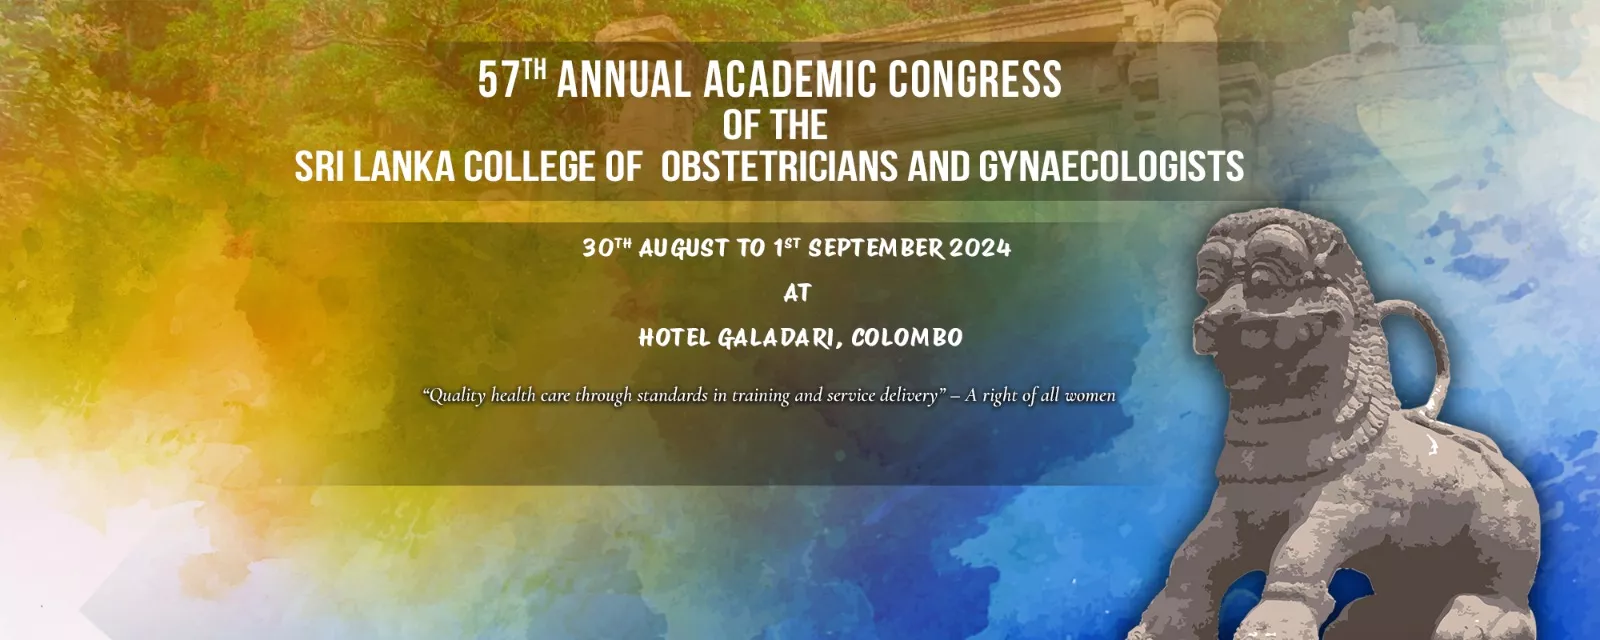 Dates of the Conference